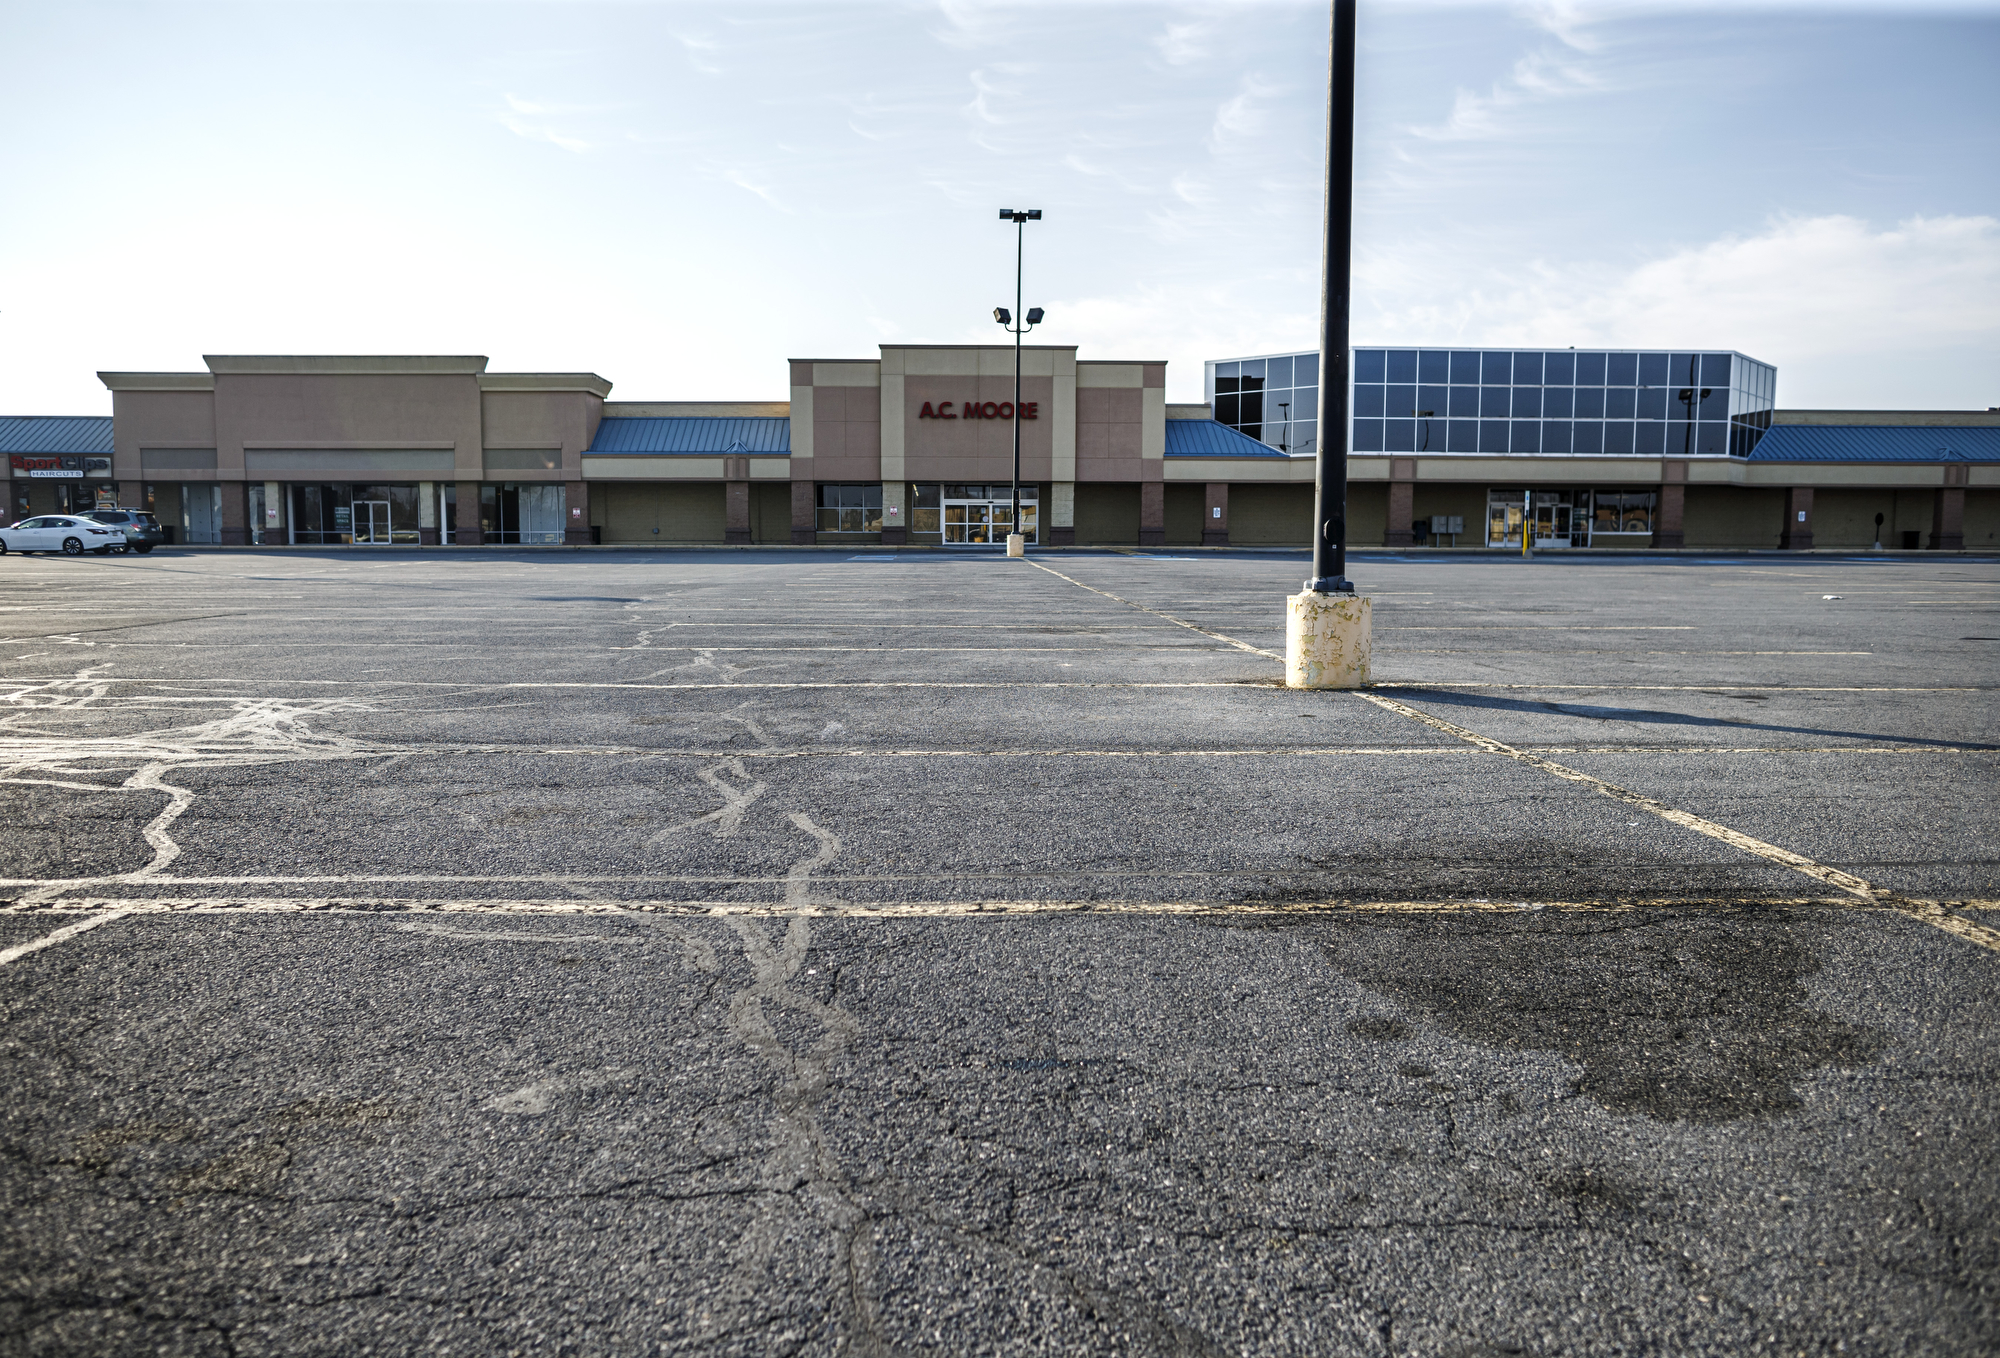 New Tenants Show Demand for Former Stein Mart Stores, Led by Burlington